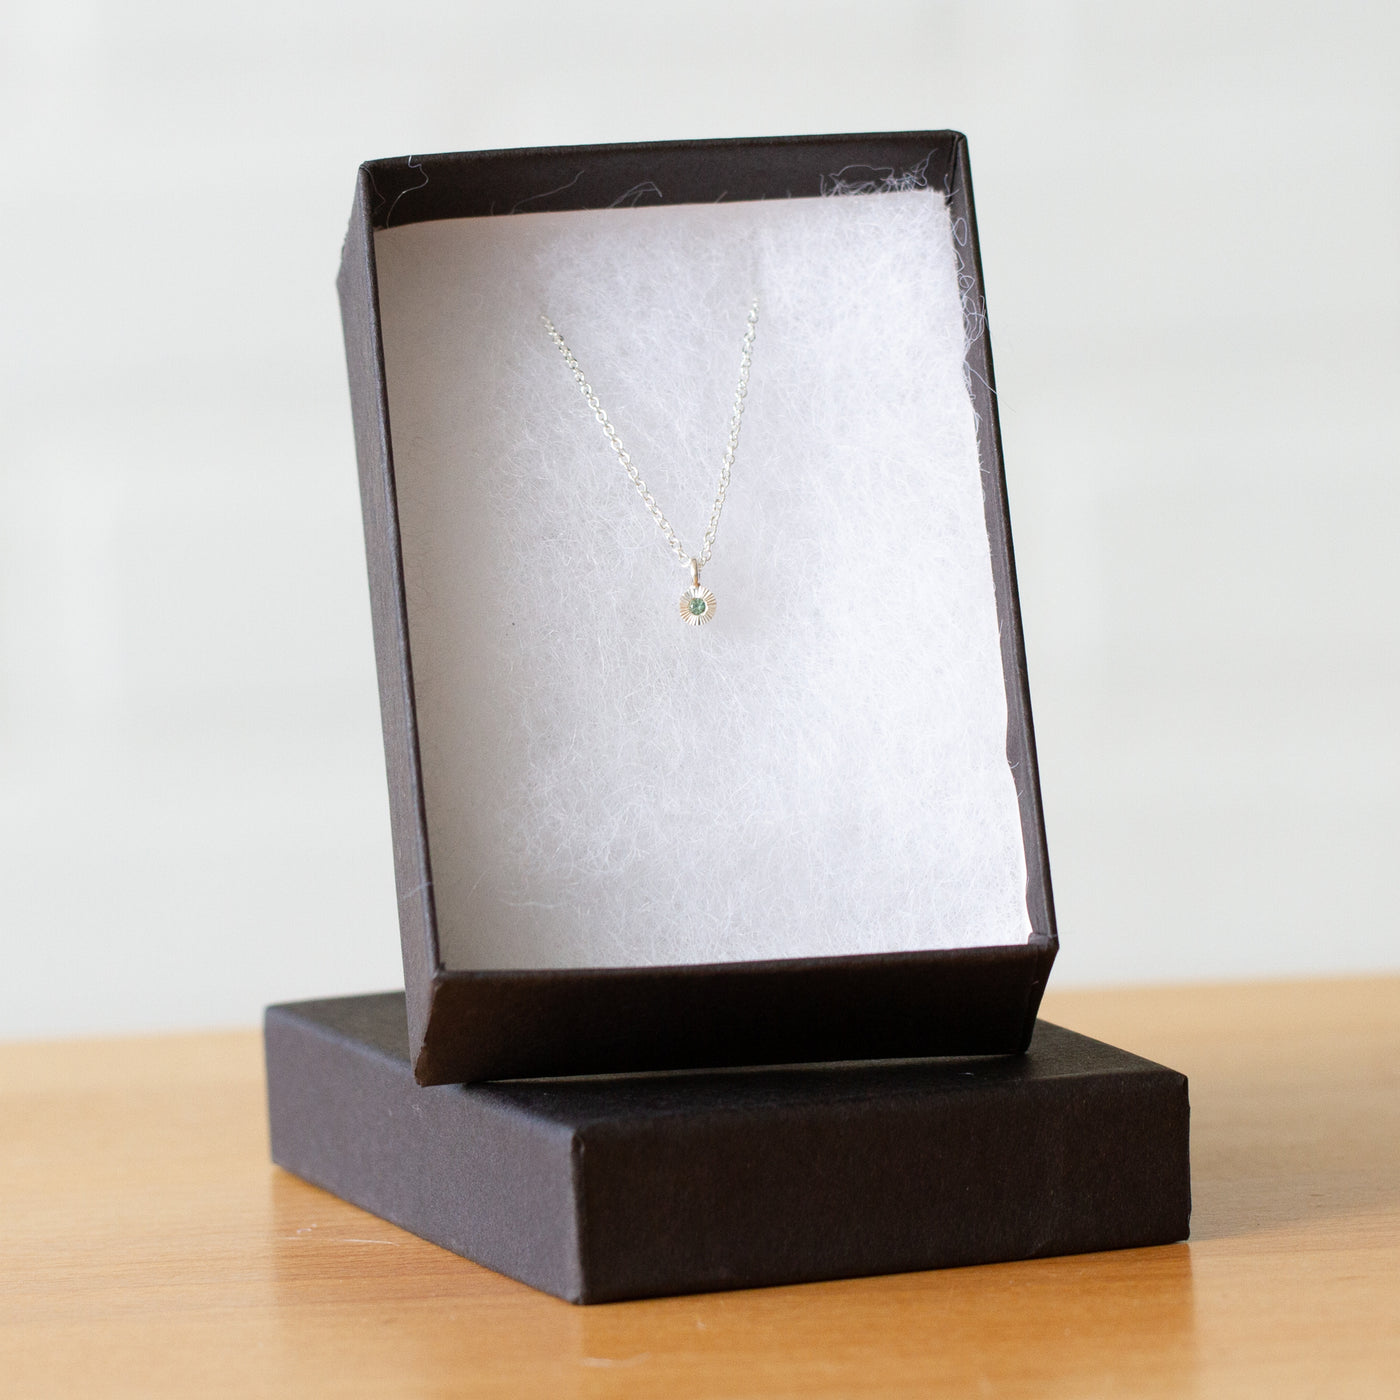 Green Sapphire Rise Necklace in Sterling Silver packaged in a jewelry box